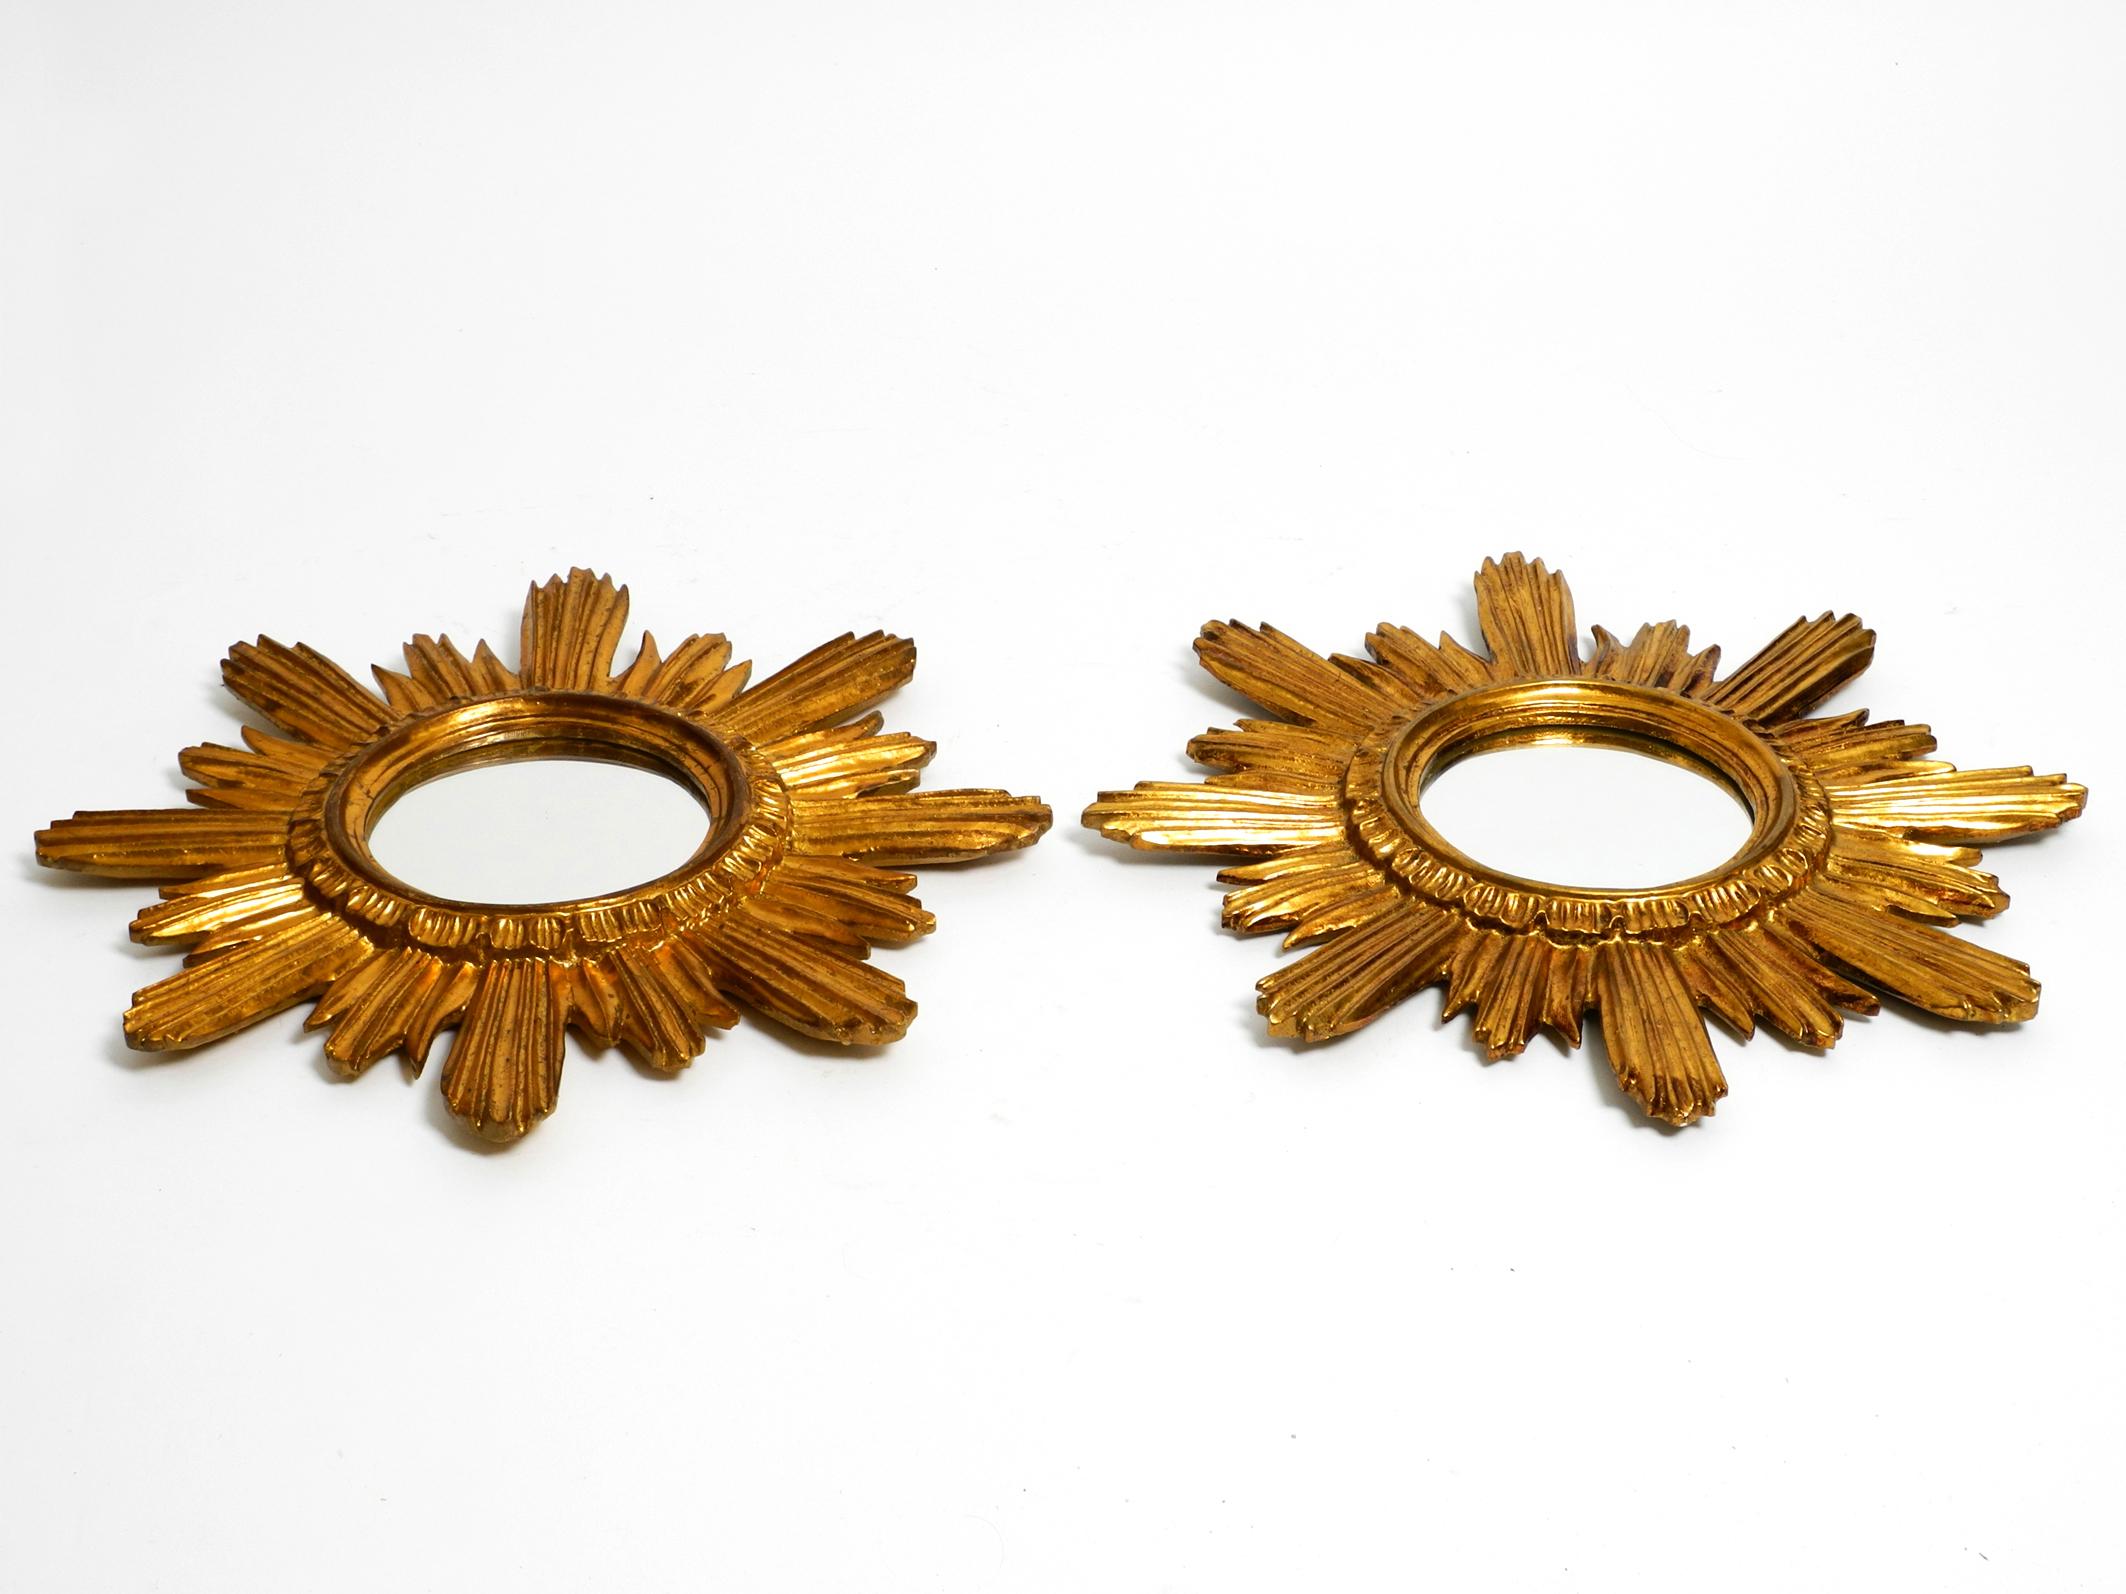 European Pair of gold-plated mid-century sunburst wall mirrors made of wood and resin